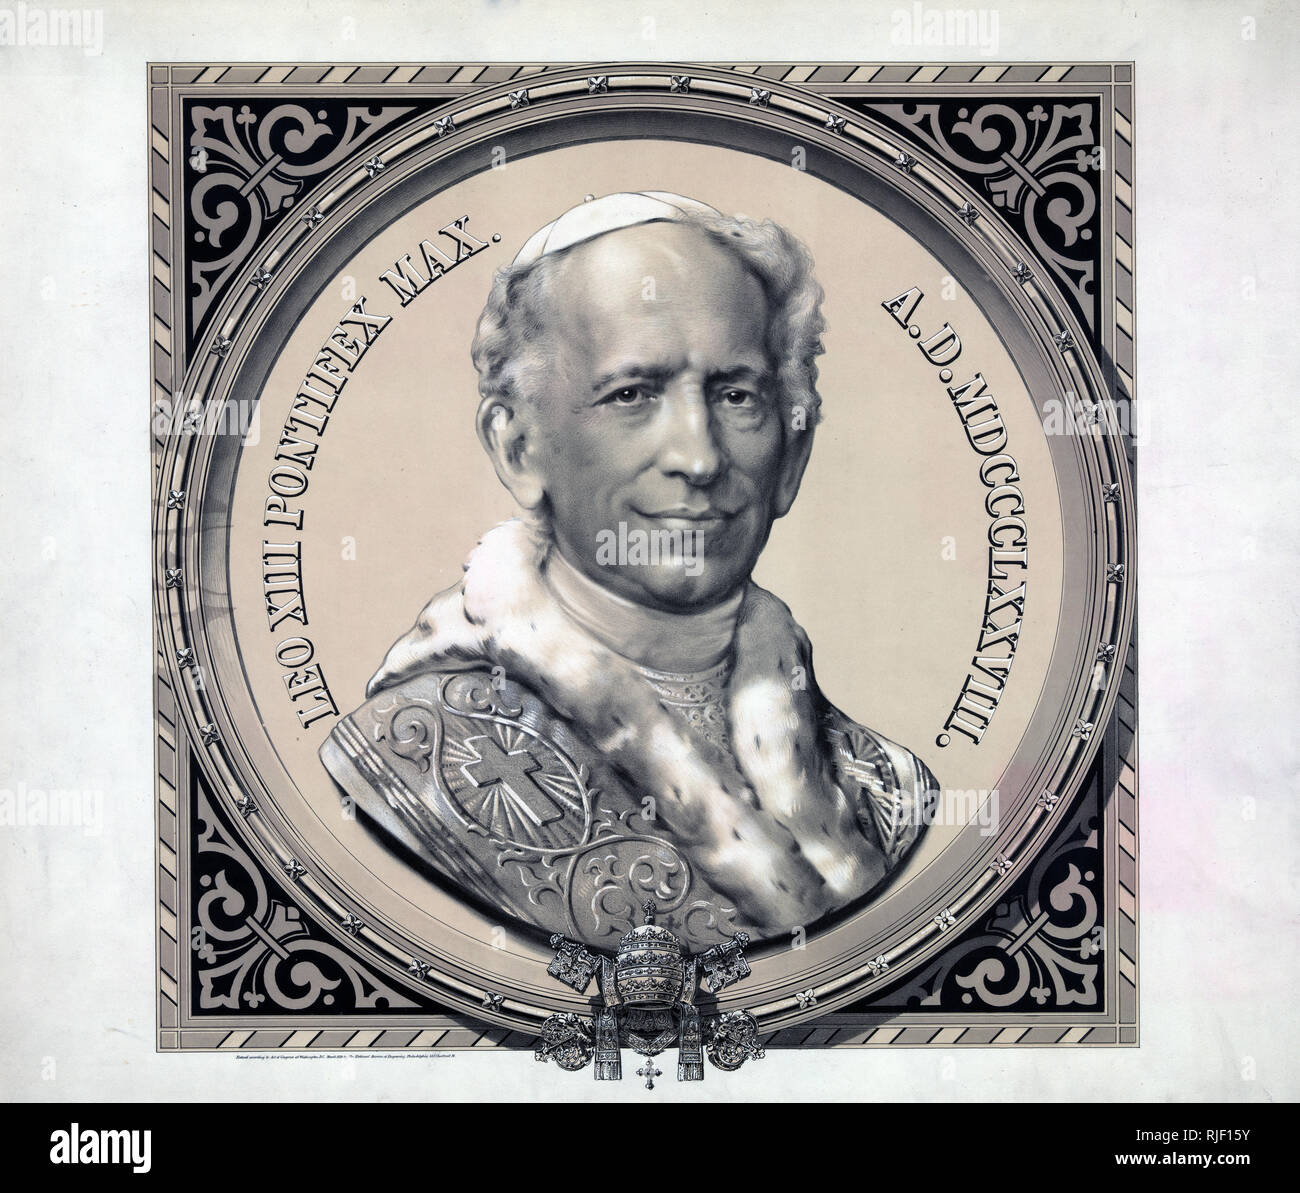 Print showing Pope Leo XIII, bust portrait, facing front, in medallion, 'surrounded by an ornamental border, representing the Holy Father, dressed in his usual robes, with stole, ermine and solideo cap on his head' and the papal crown, a tiara, with crossed keys at the base of the medallion. Stock Photo